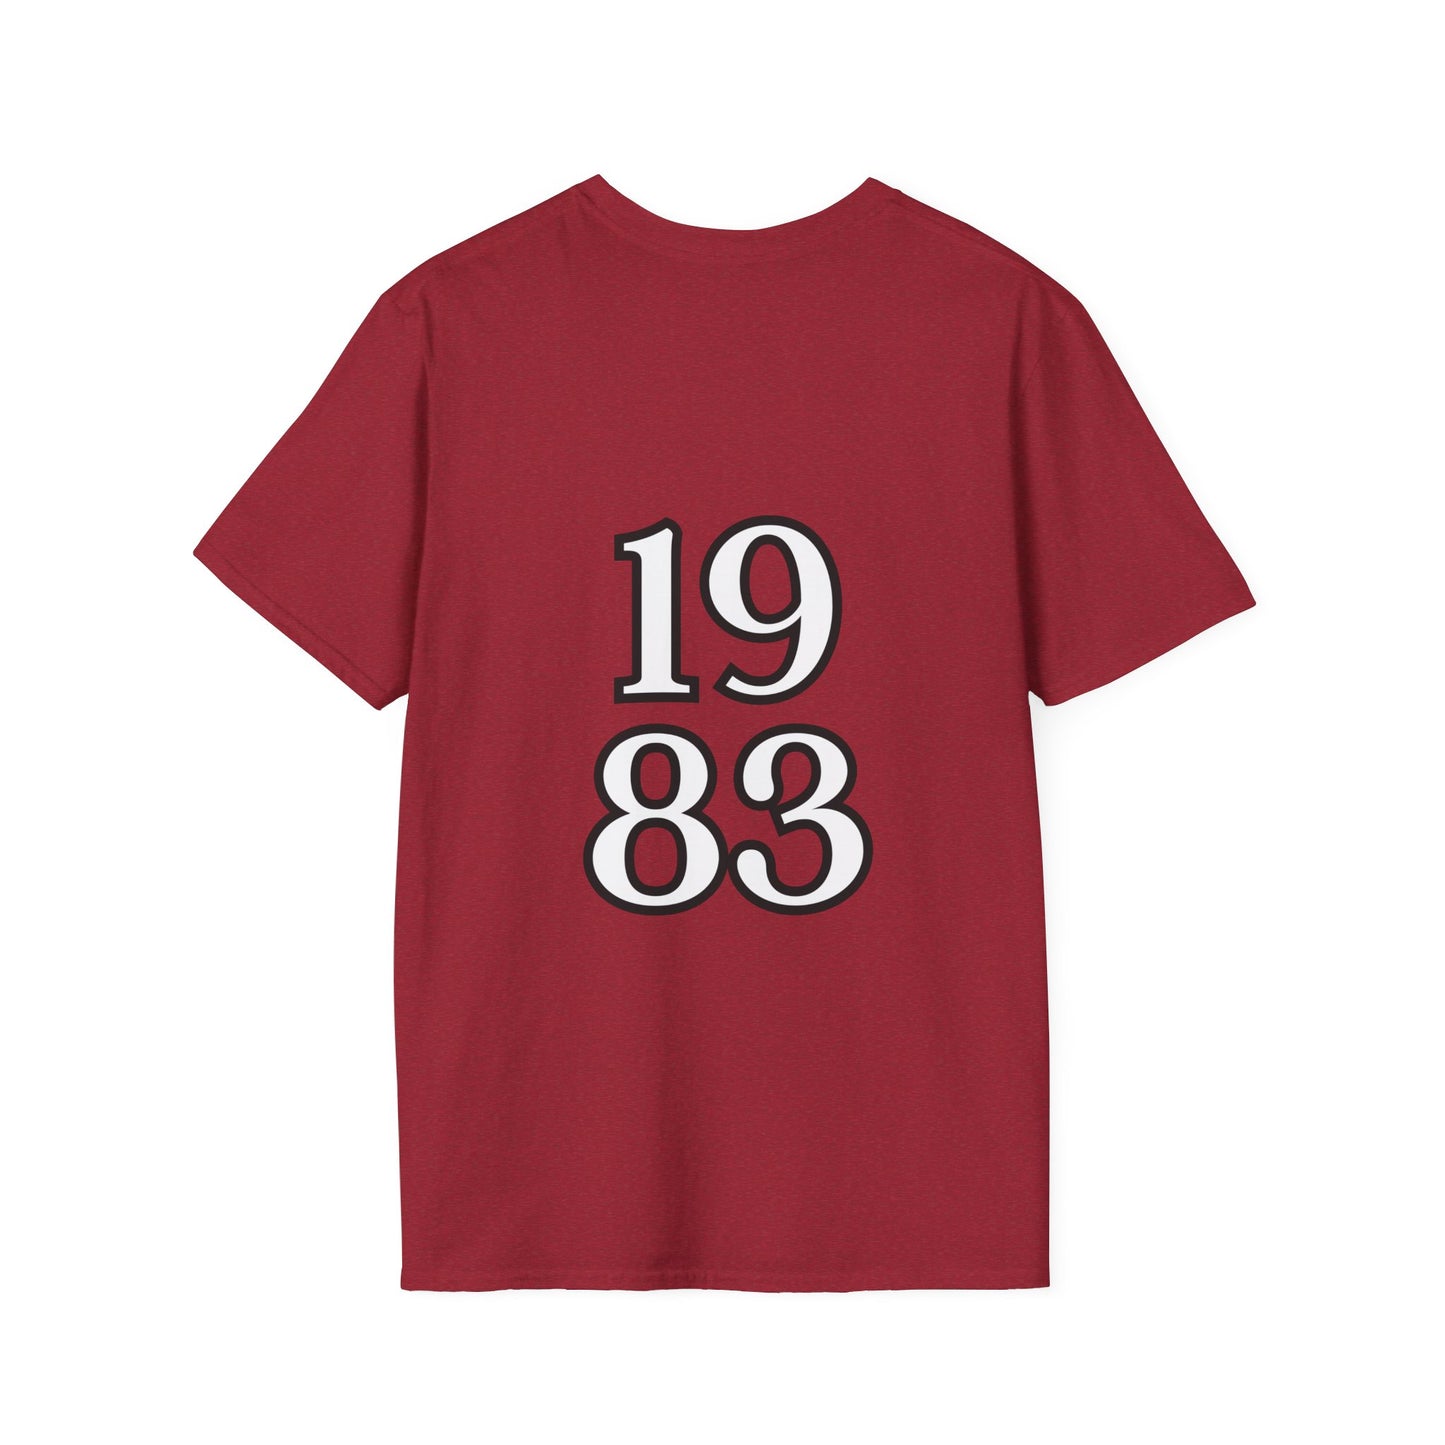 1983 x Years Collection - tee